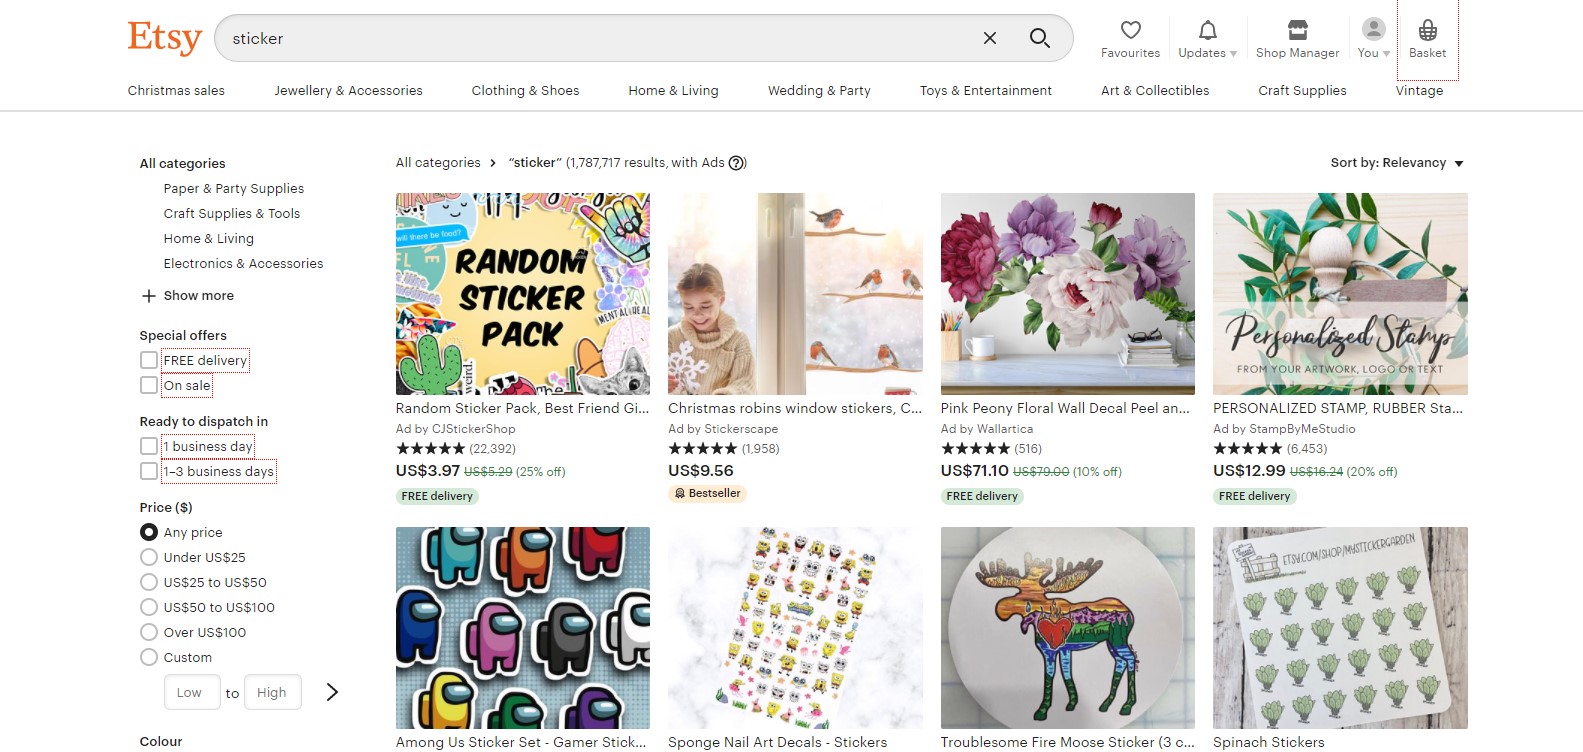 Stickers - Top 10 Best Selling Items on Etsy